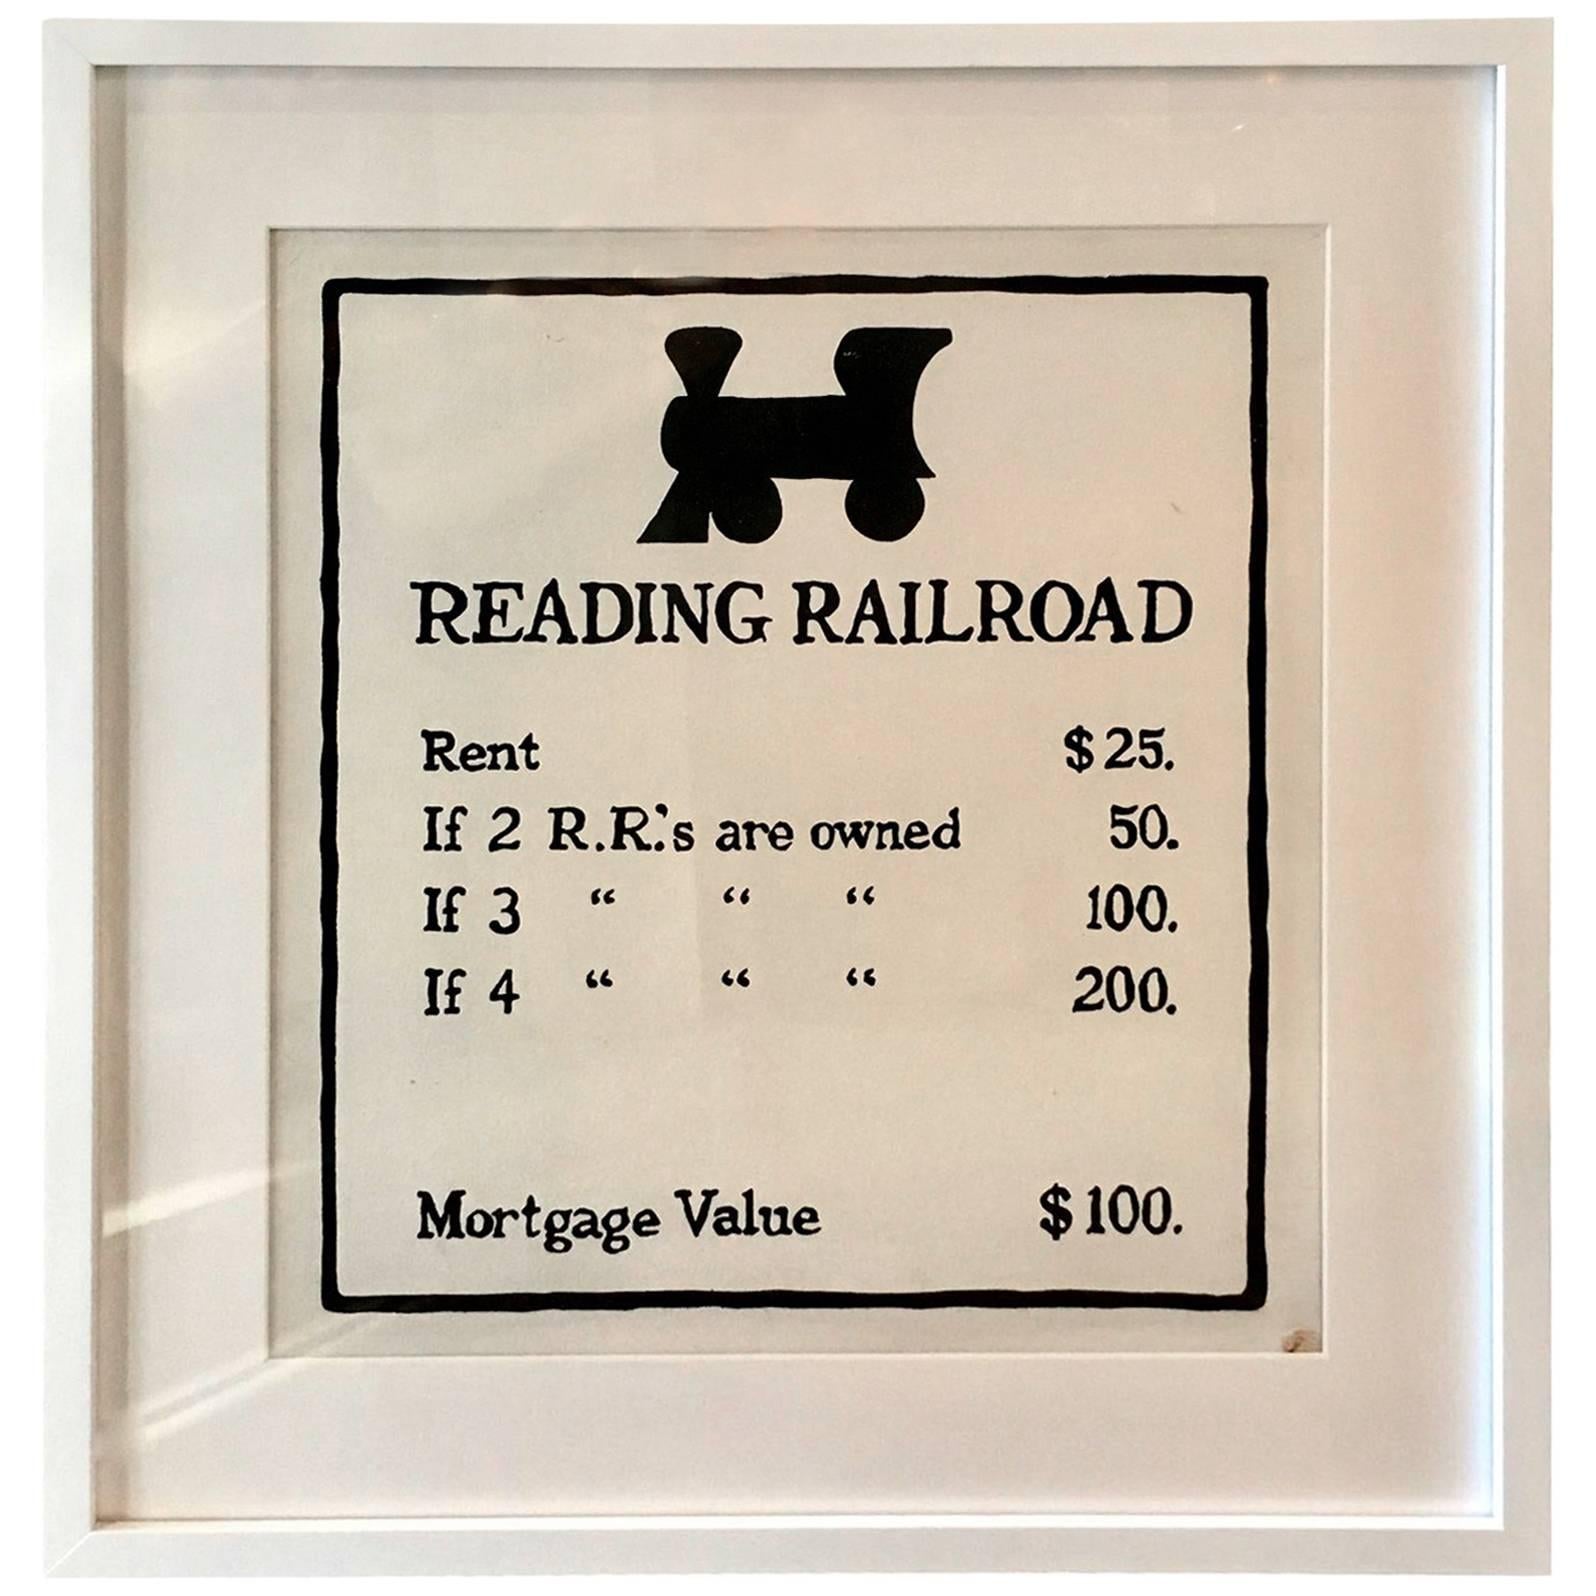 Oversized Hand-Painted Monopoly Sign "Reading Railroad"